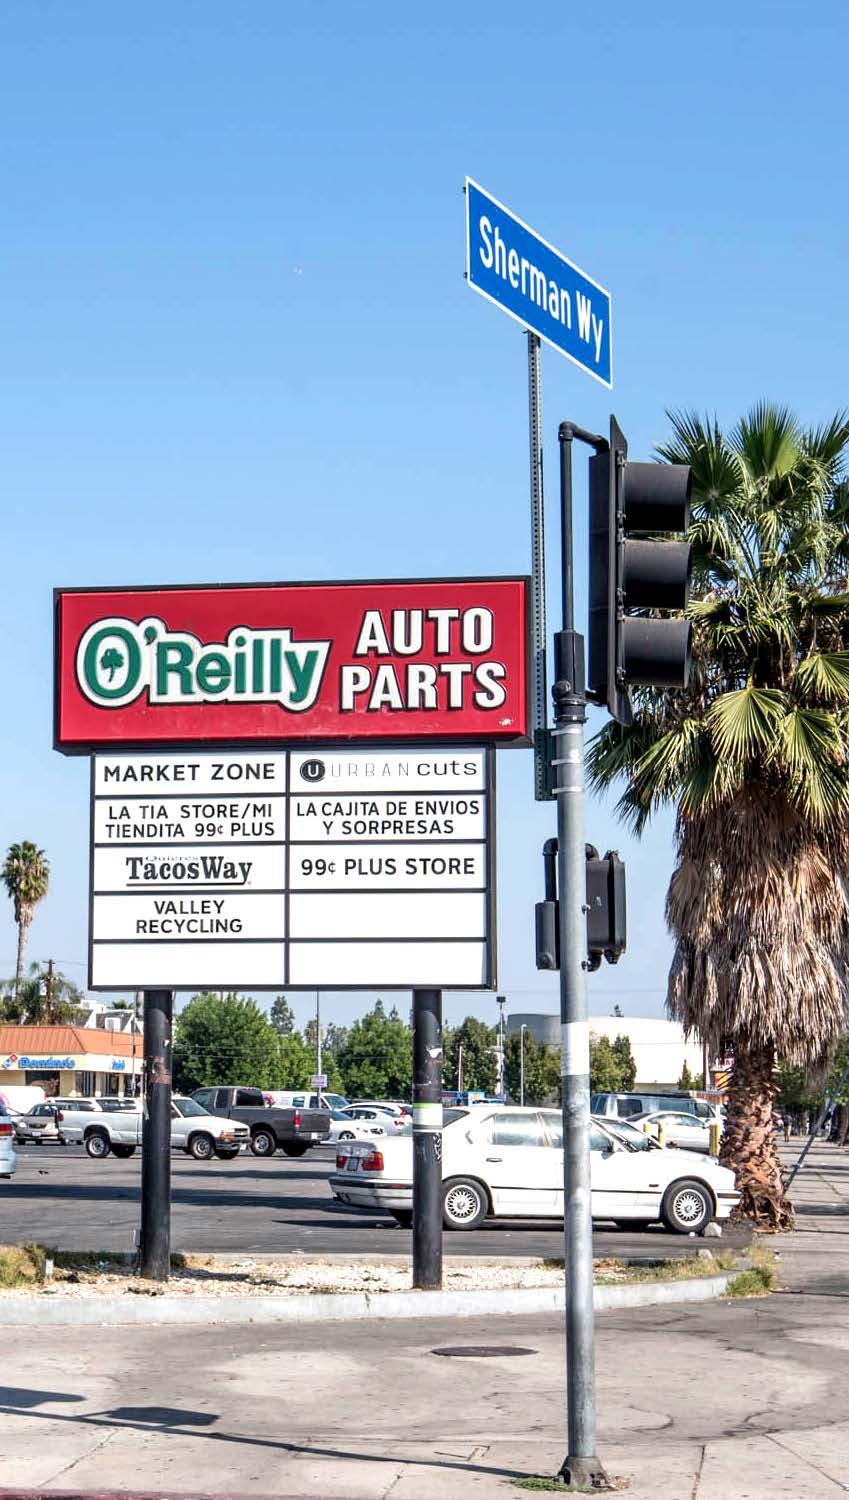 Founded in 1957 by the O Reilly family, the company operates more than 4,970 stores in 47 states. O Reilly Automotive, Inc.